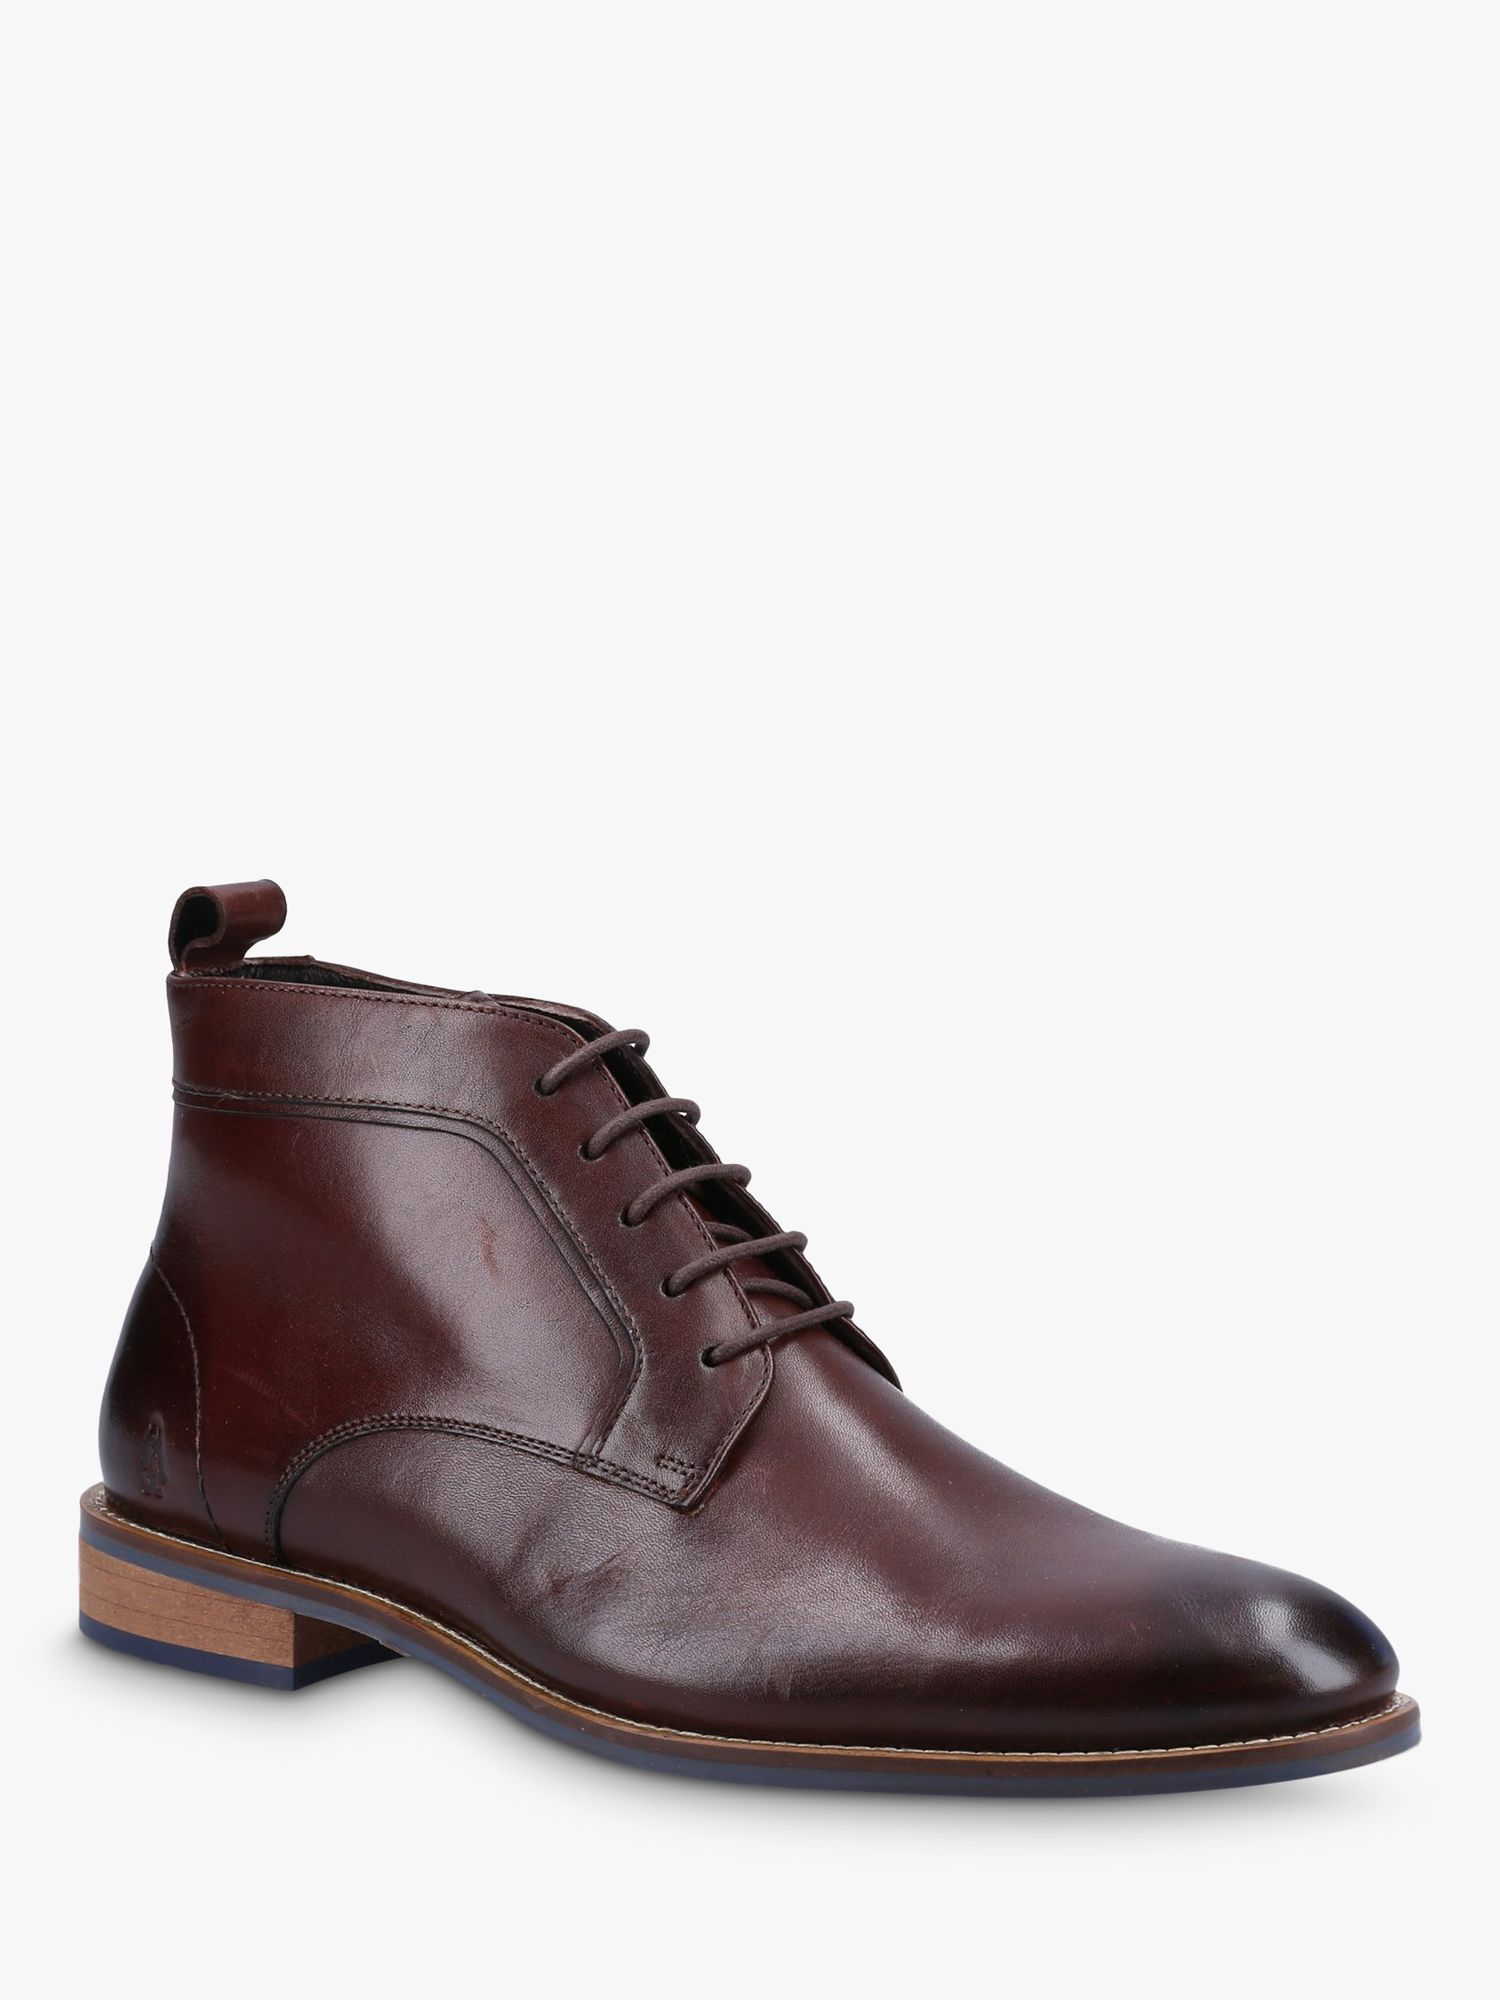 Hush Puppies Declan Leather Lace Up Ankle Boots at John Lewis & Partners